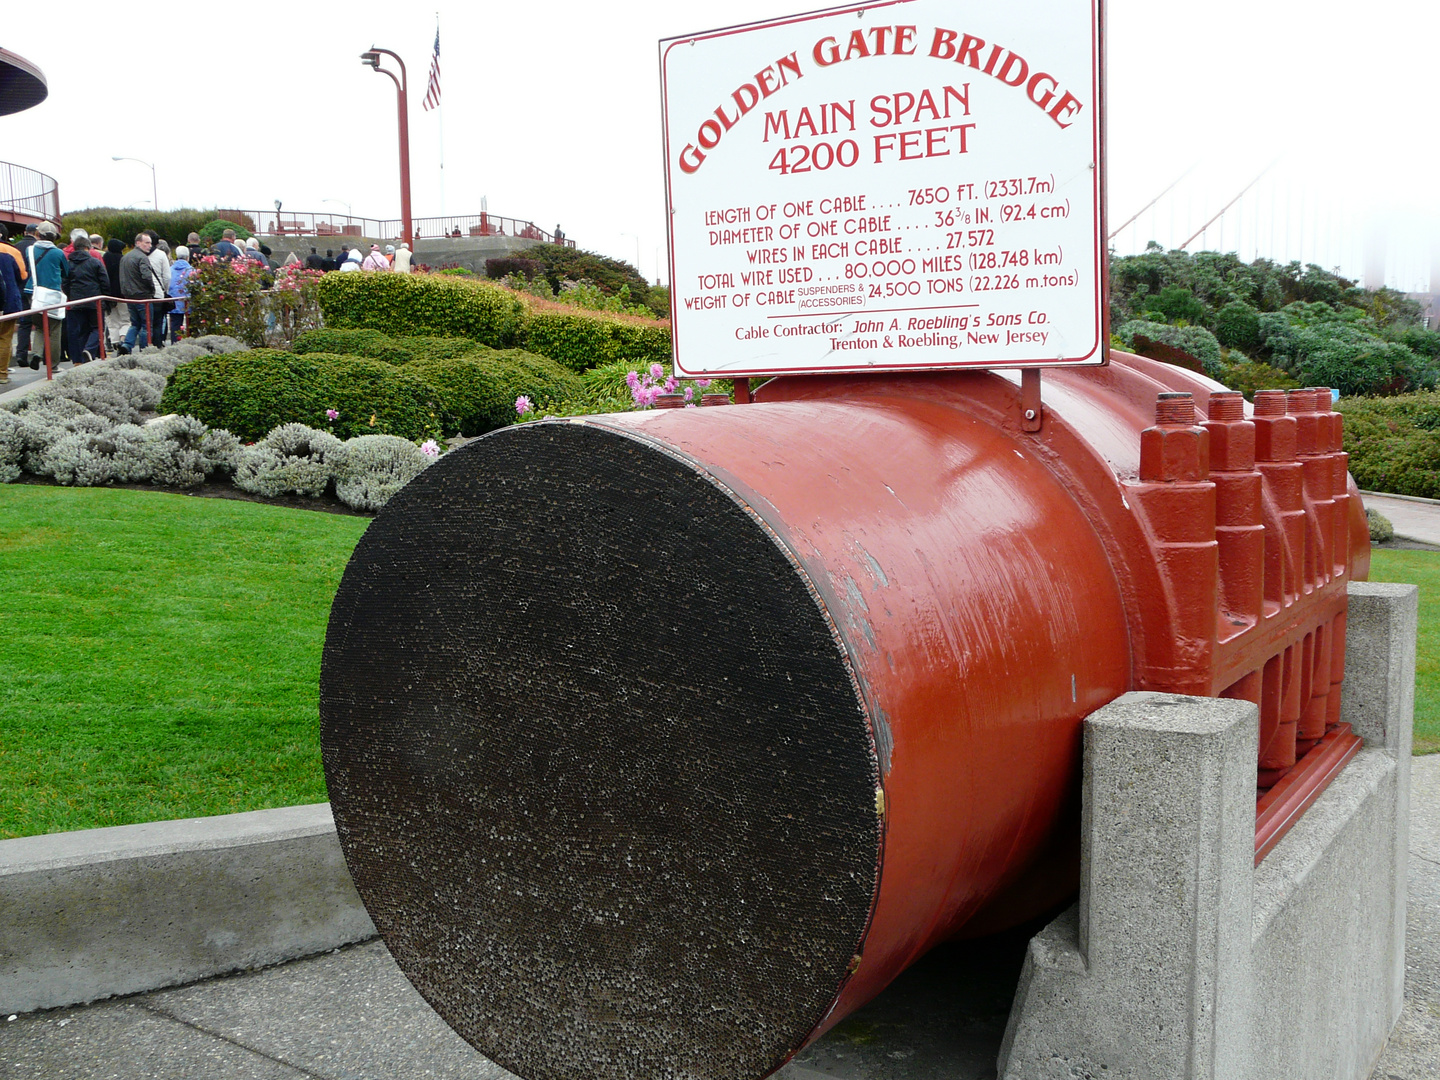 One cable of the Golden Gate Bridge.....